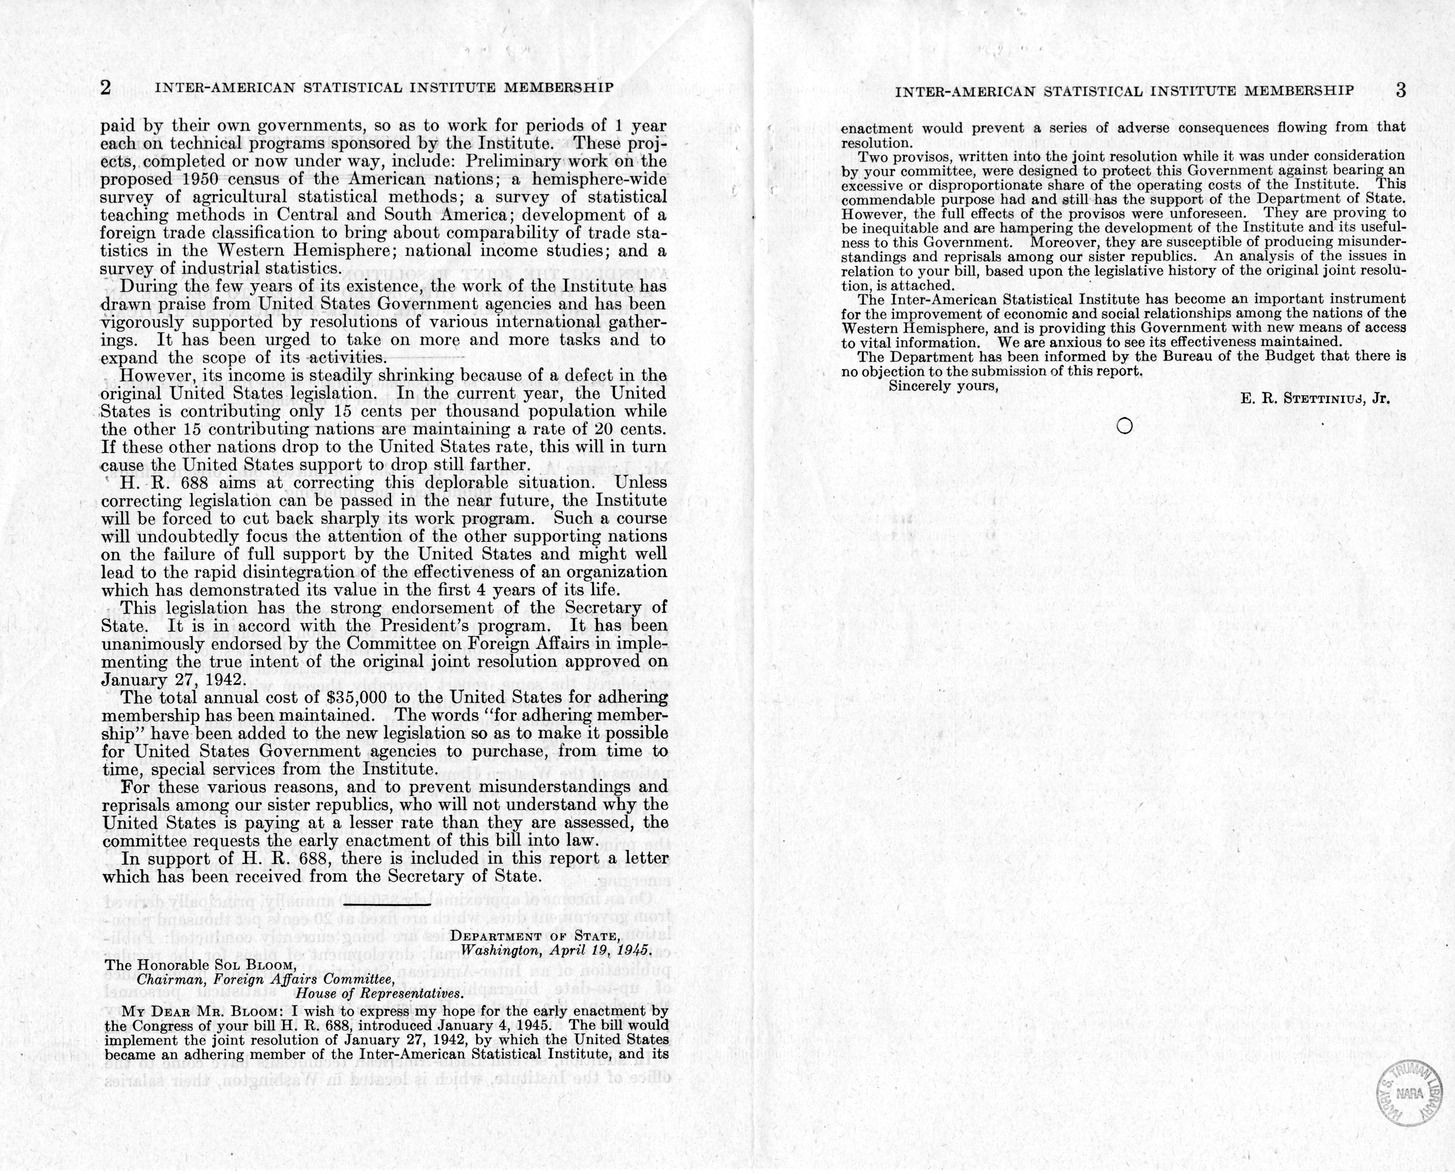 Memorandum from Harold D. Smith to M. C. Latta, H.R. 688, To amend the Joint Resolution of January 27, 1942, Entitled 'Joint Resolution to Enable the United States to Become an Adhering Member of the Inter-American Statistical Institute,' with Attachments